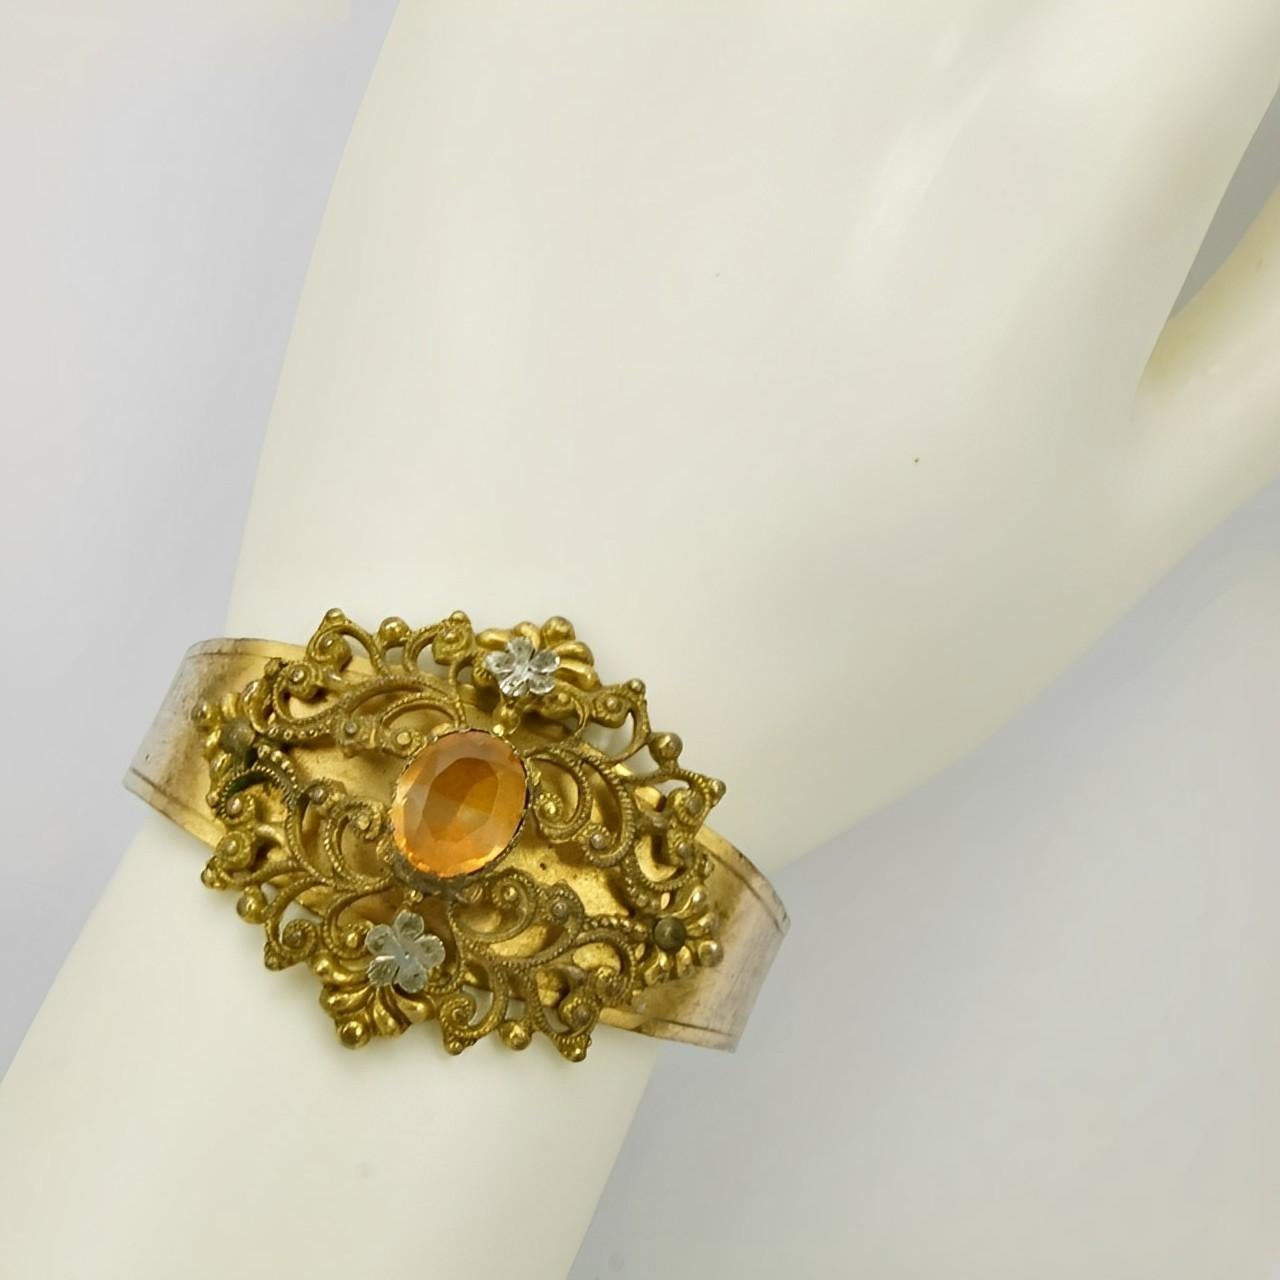 Art Deco Gold Plated Filigree and Amber Paste Stone Bangle Bracelet circa 1930s For Sale 4